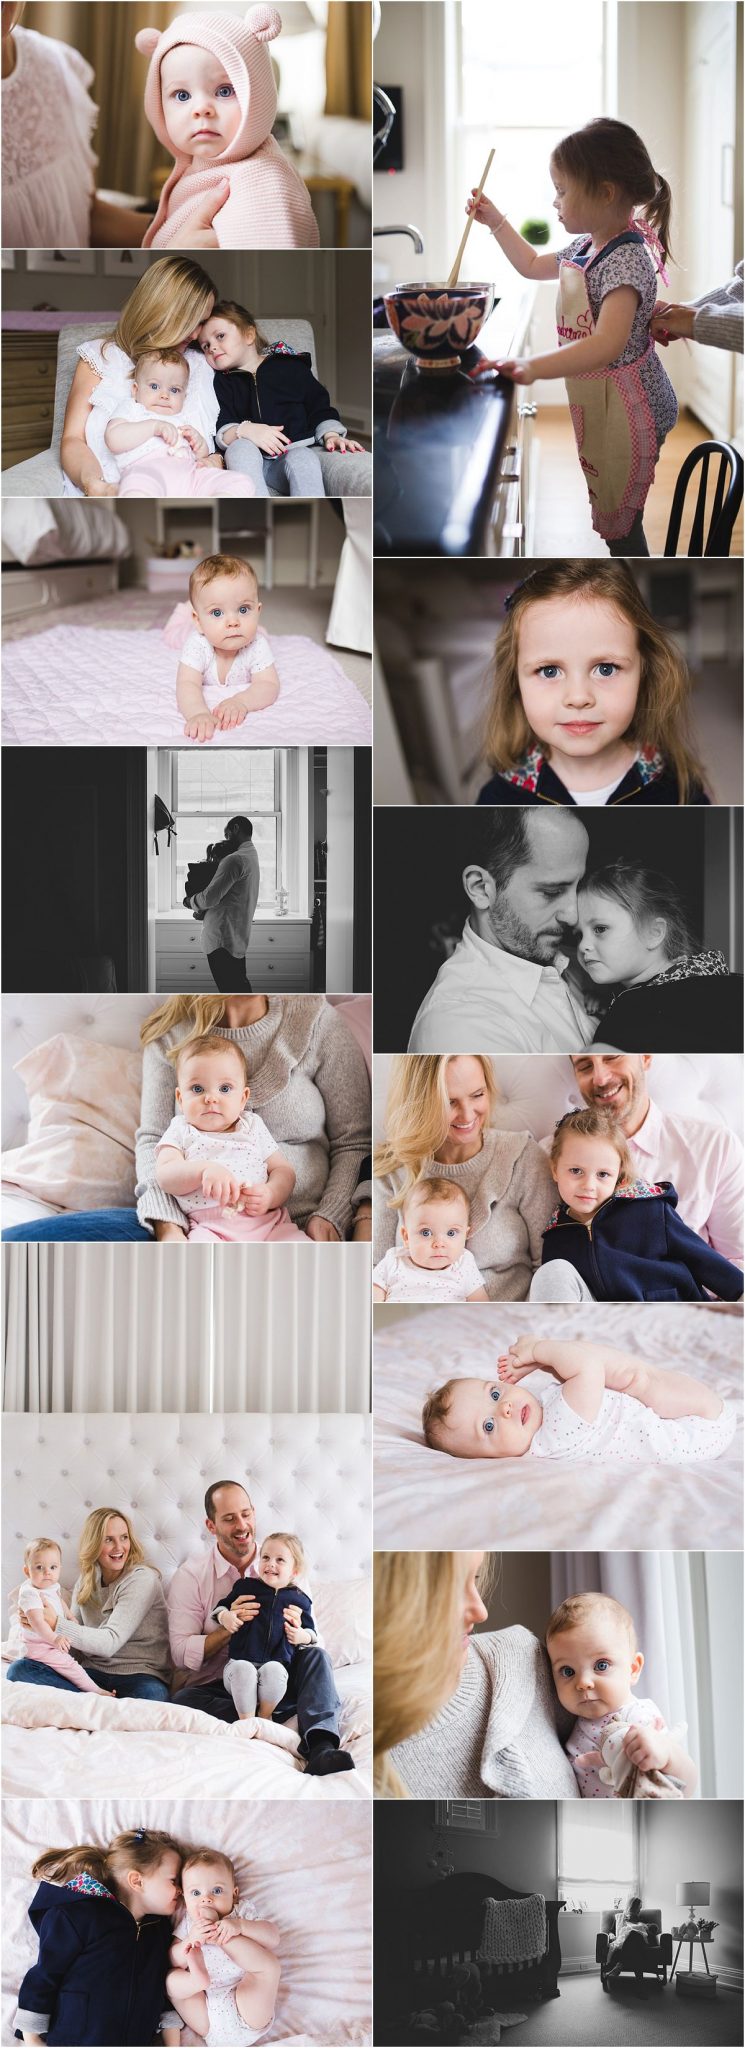 Lifestyle Photography | Michelle Little Photography, Montreal, Quebec, Canada